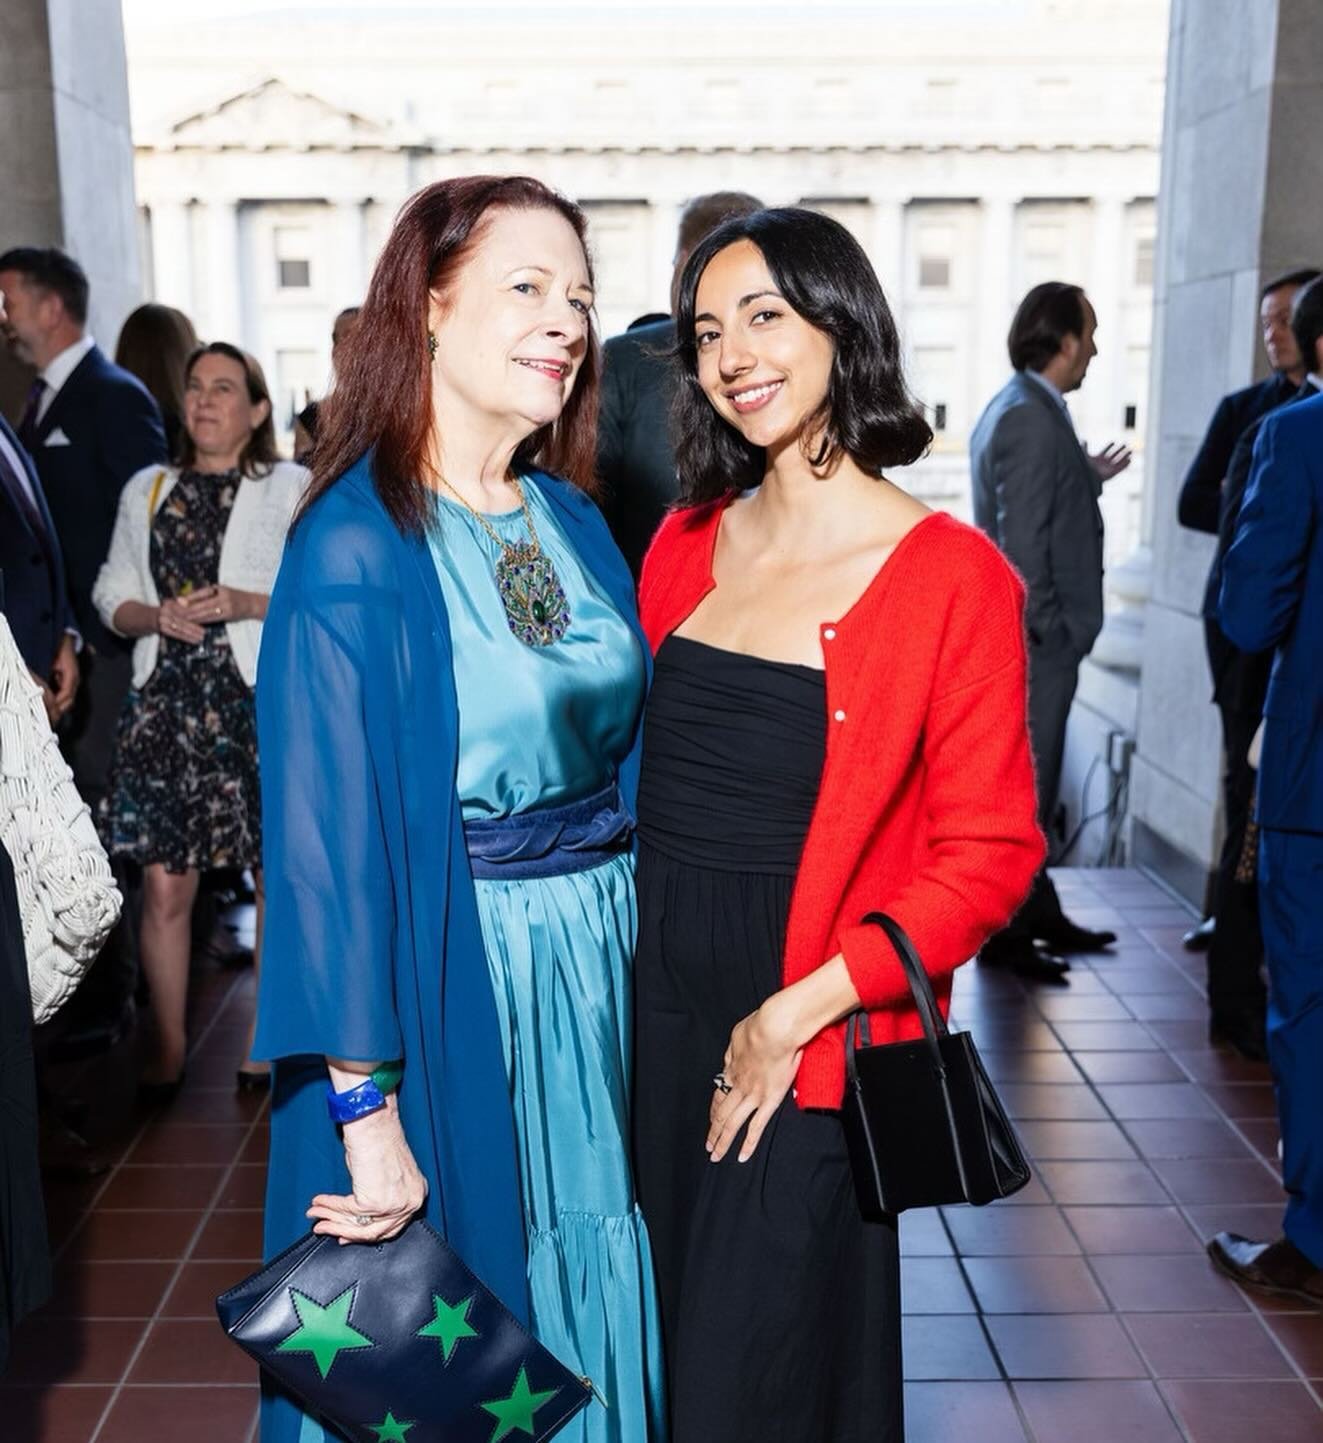 COUPAR Out &amp; About ~ It is always a visual treat when @icaanocal celebrates the Julia Morgan Awards at The Green Room in the San Francisco War Memorial &amp; Performing Arts Center, designed by architect Arthur Brown Jr. Our Marketing Team had th